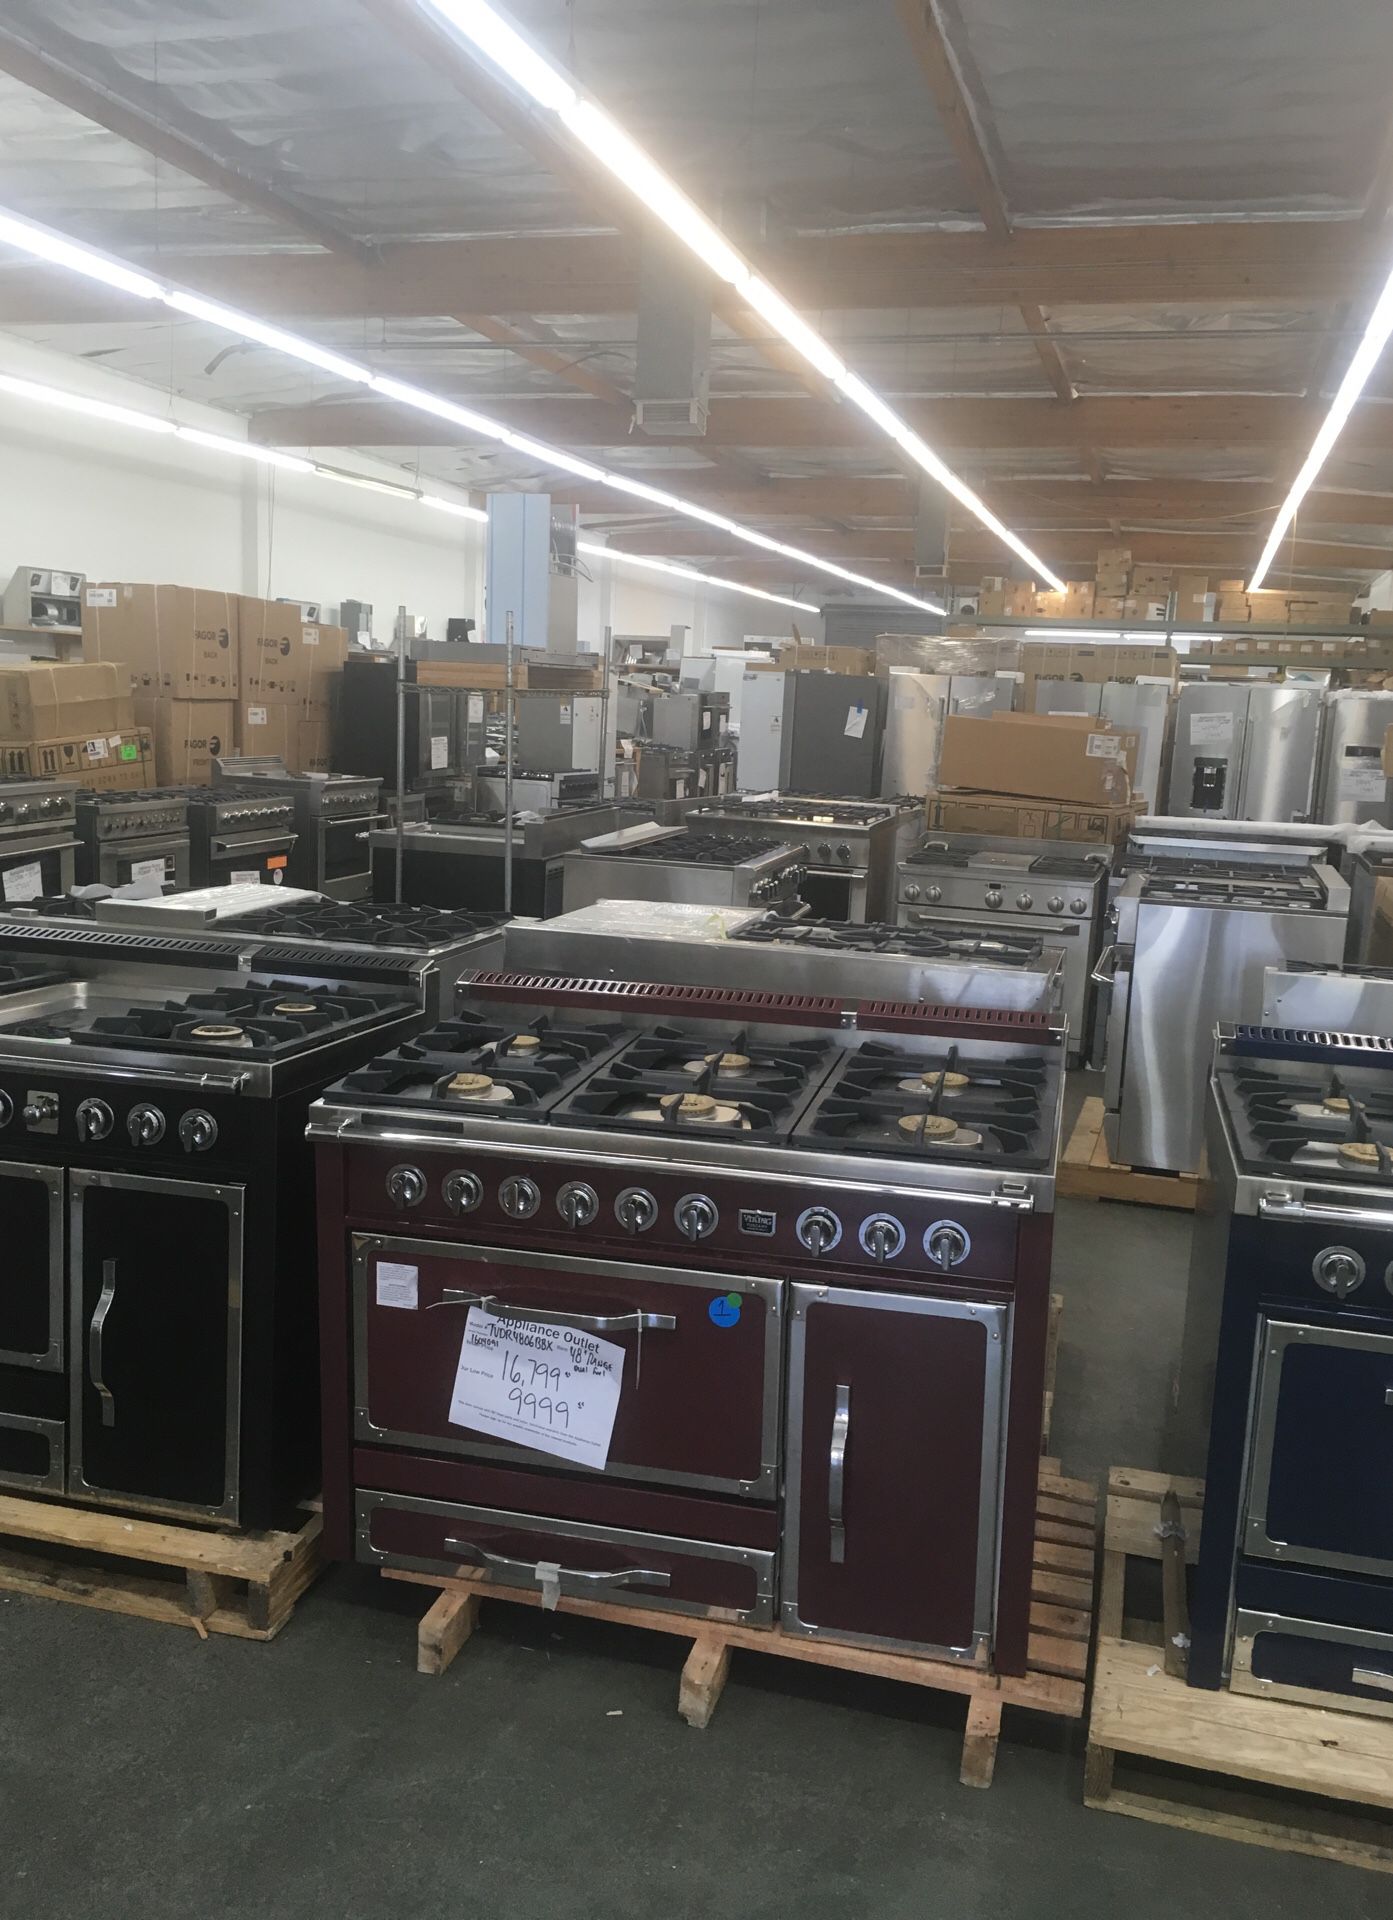 Dishwashers. Refrigerators Ranges Cooktops. BBQ grills. Hoods. Ice makers wine chillers